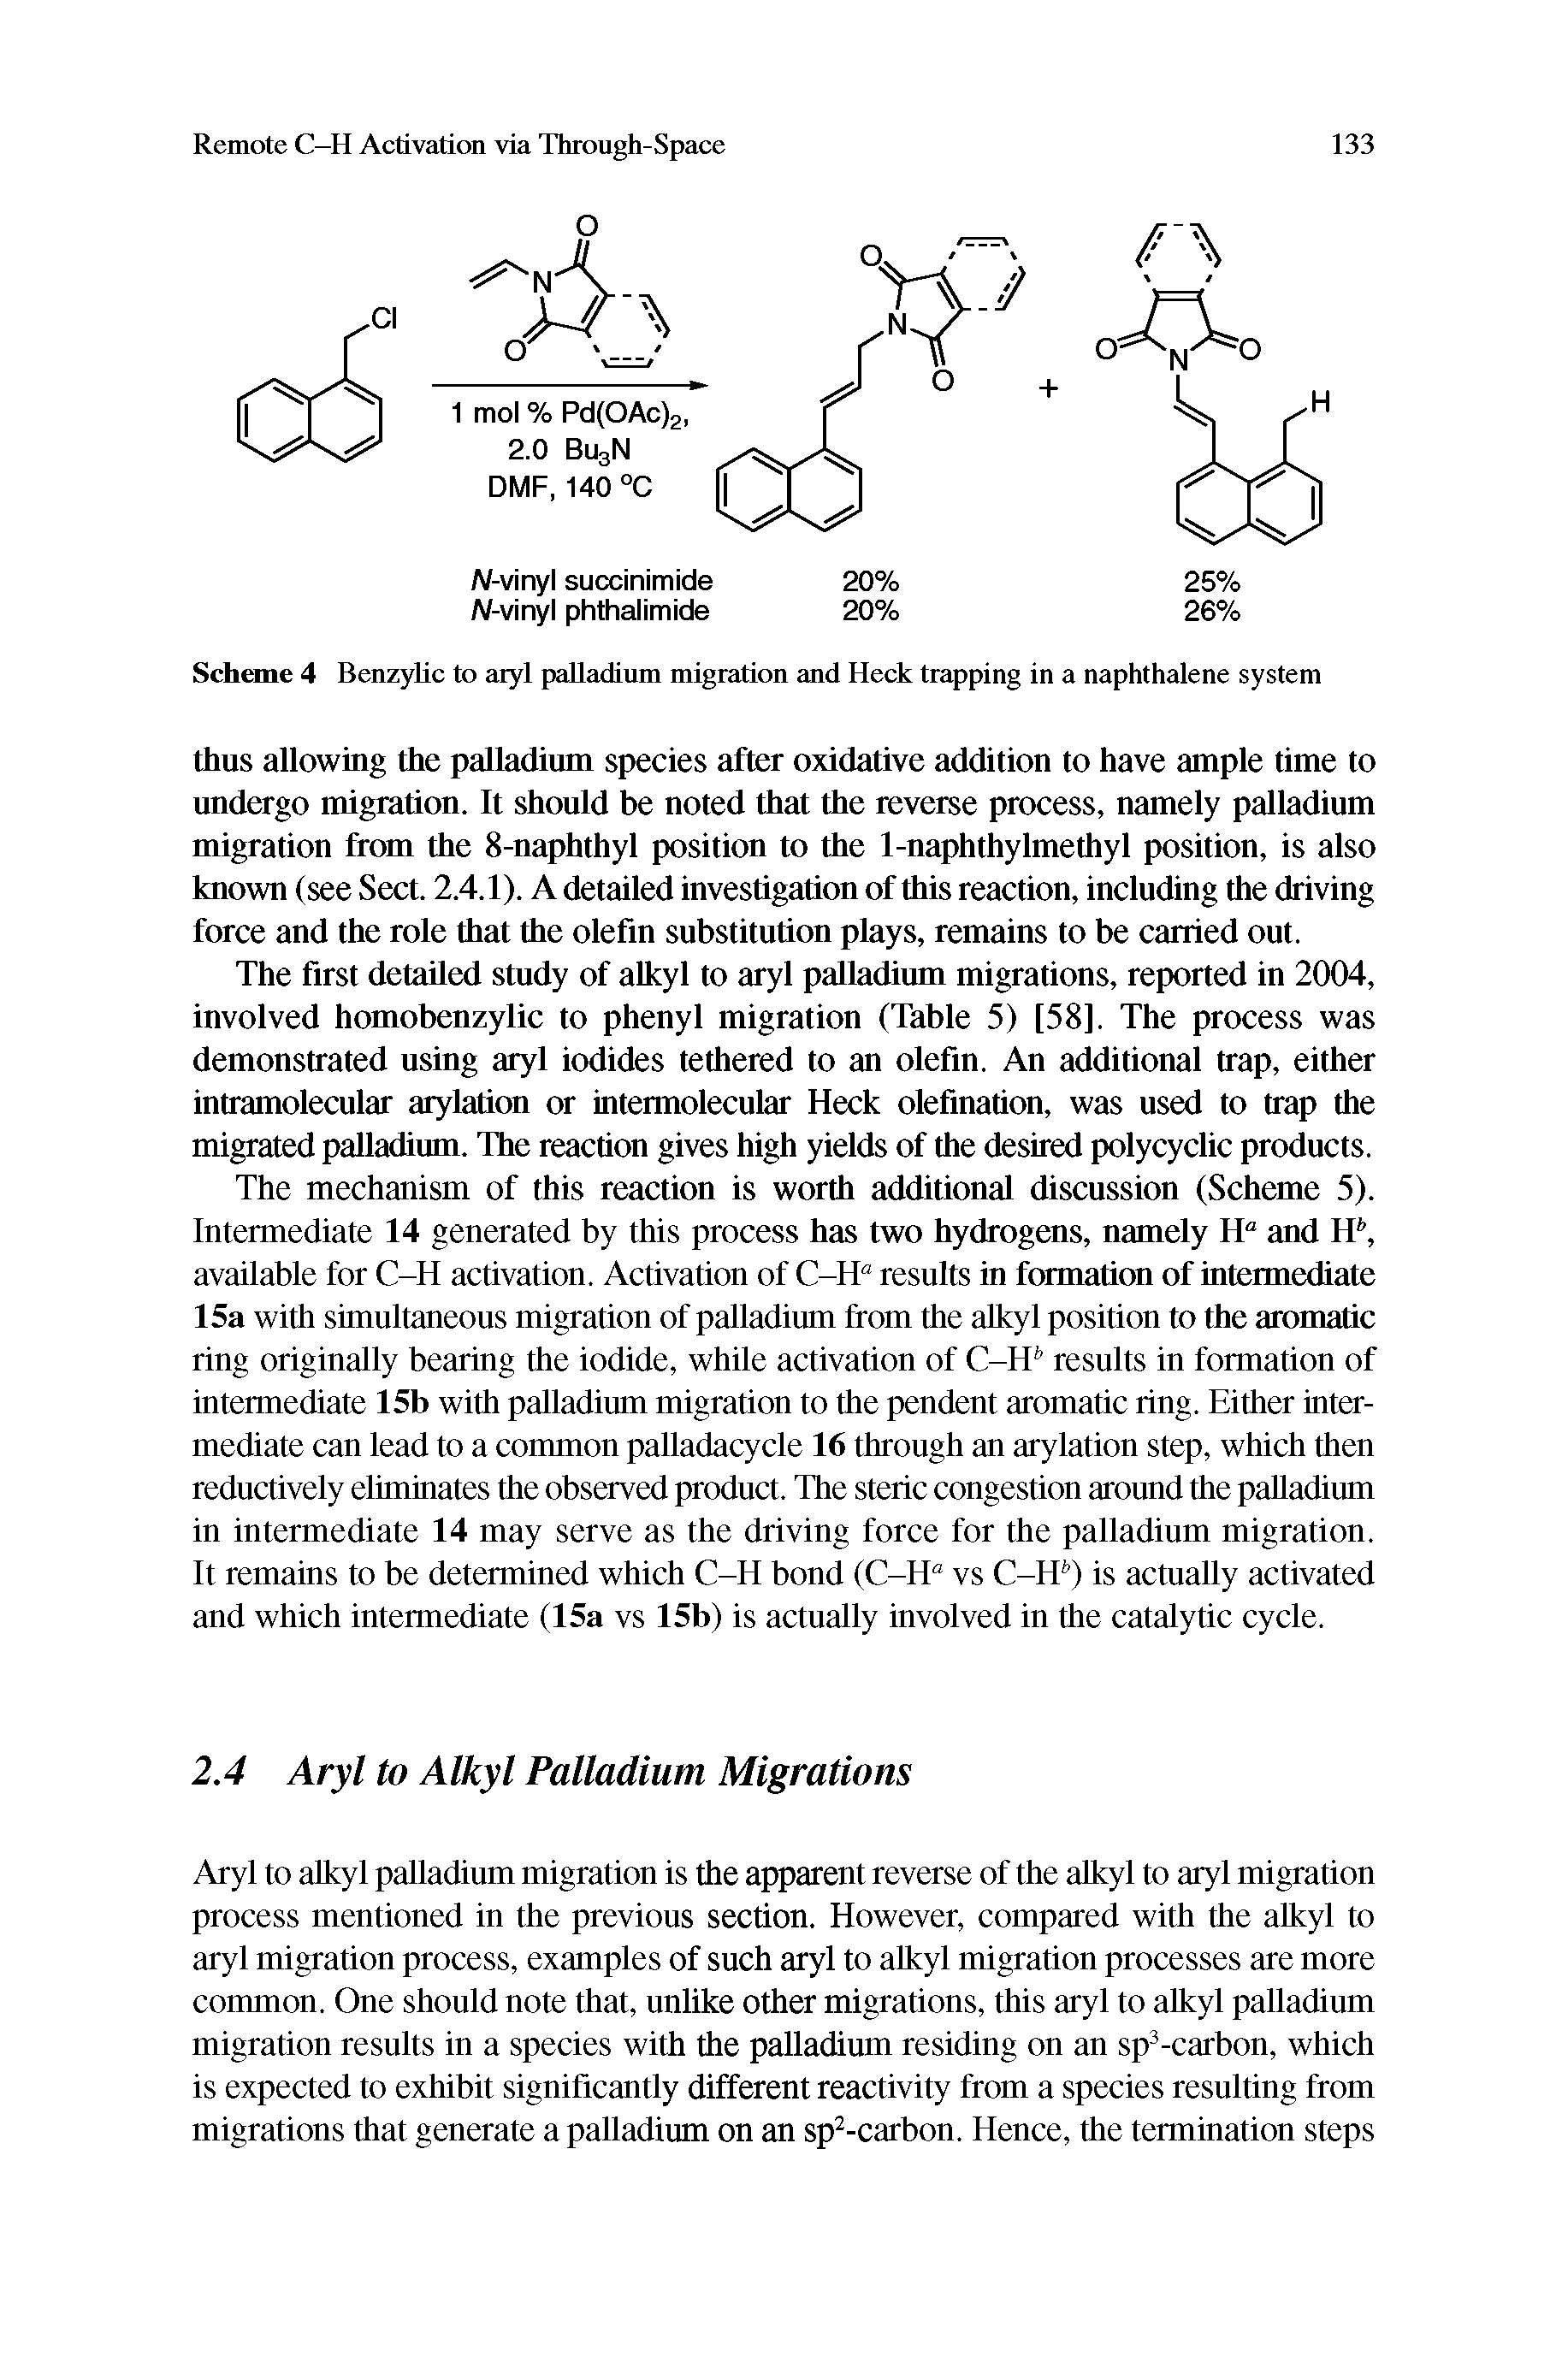 Scheme 4 Benzylic to aryl palladium migration and Heck trapping in a naphthalene system...